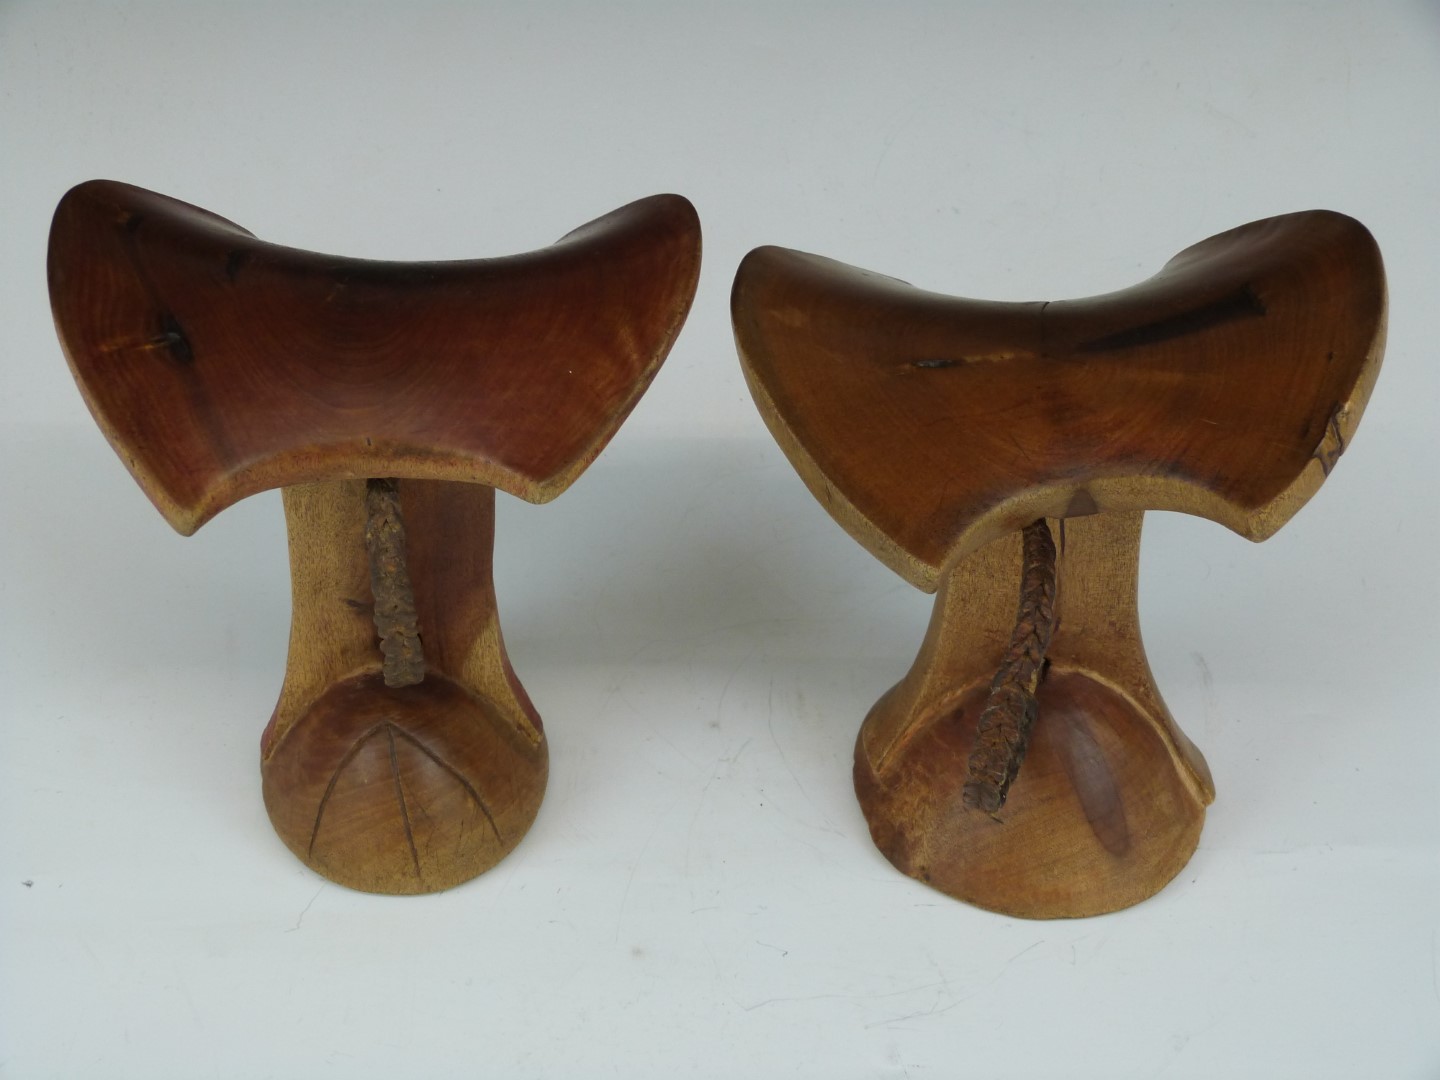 Two carved African tribal headrests with braided leather handles, Ileret, Latee Turkana region, - Image 2 of 4